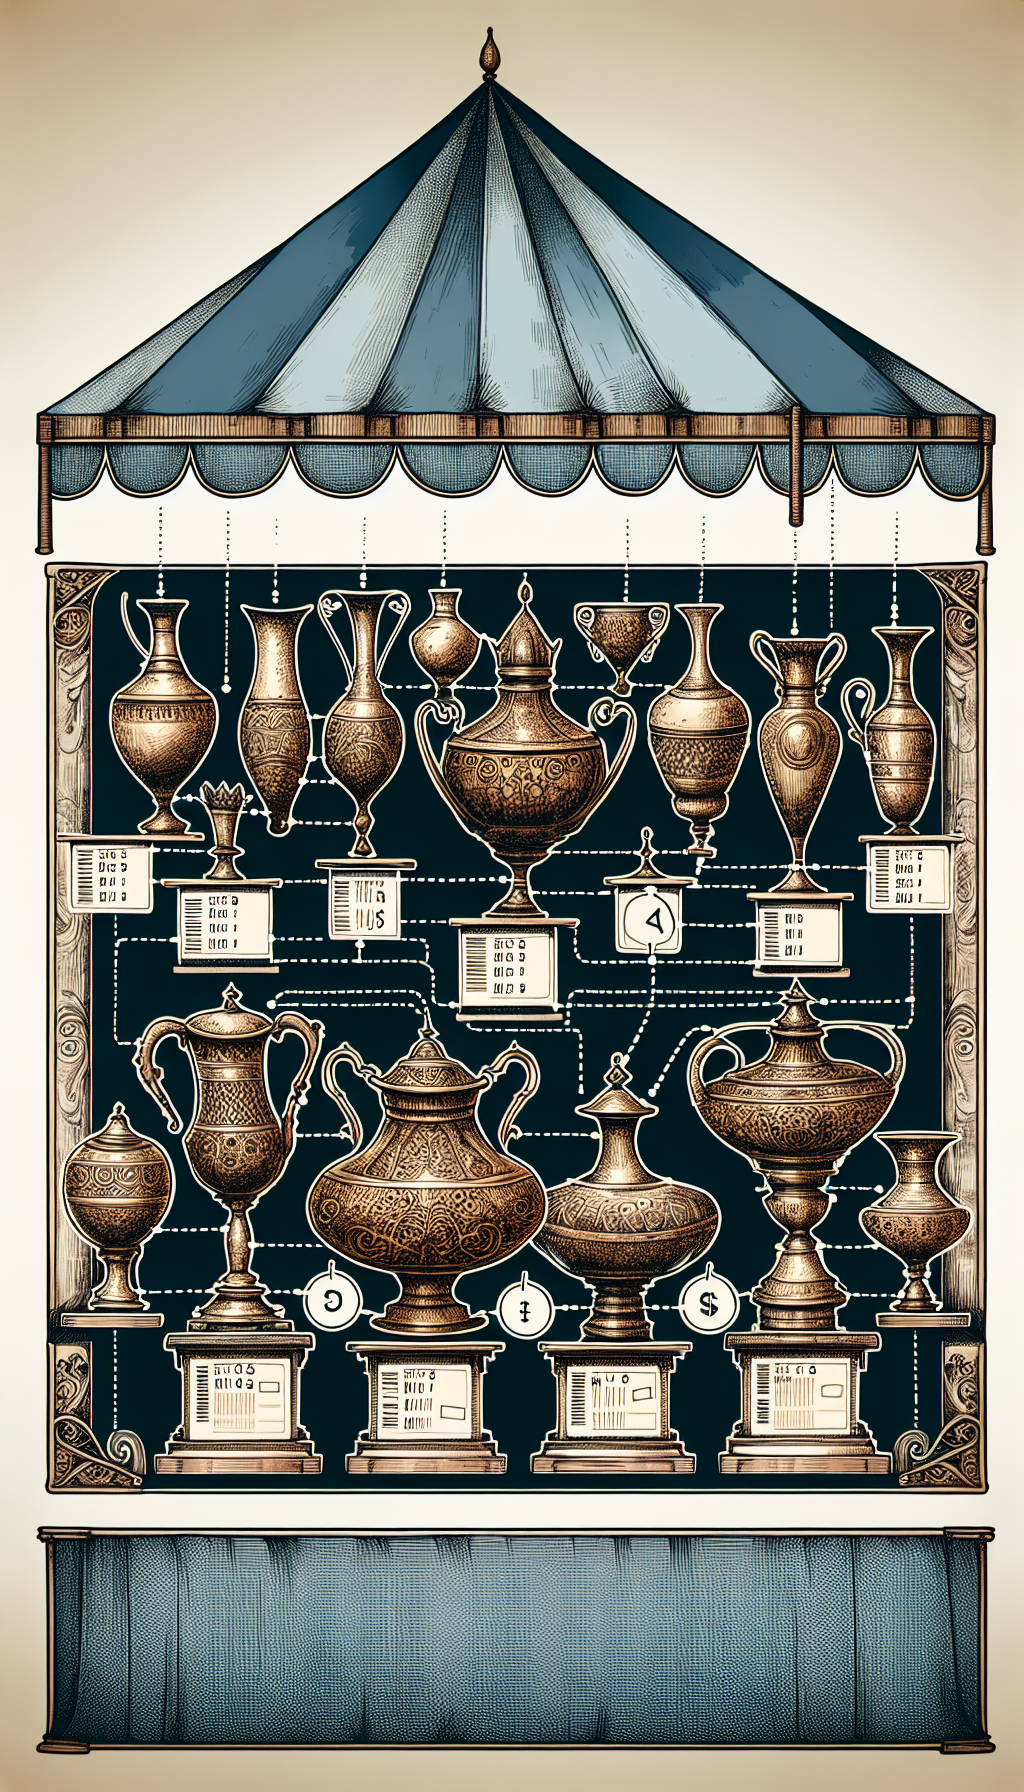 An illustration showcases an array of antique brass vases displayed on cascading pedestals that resemble price tags, each with different value labels. Above, a whimsically drawn marketplace canopy floats, harboring various trading venues like auction houses, online platforms, and antique shops, connected by dotted lines to the appropriate vases, hinting at their ideal selling spots.